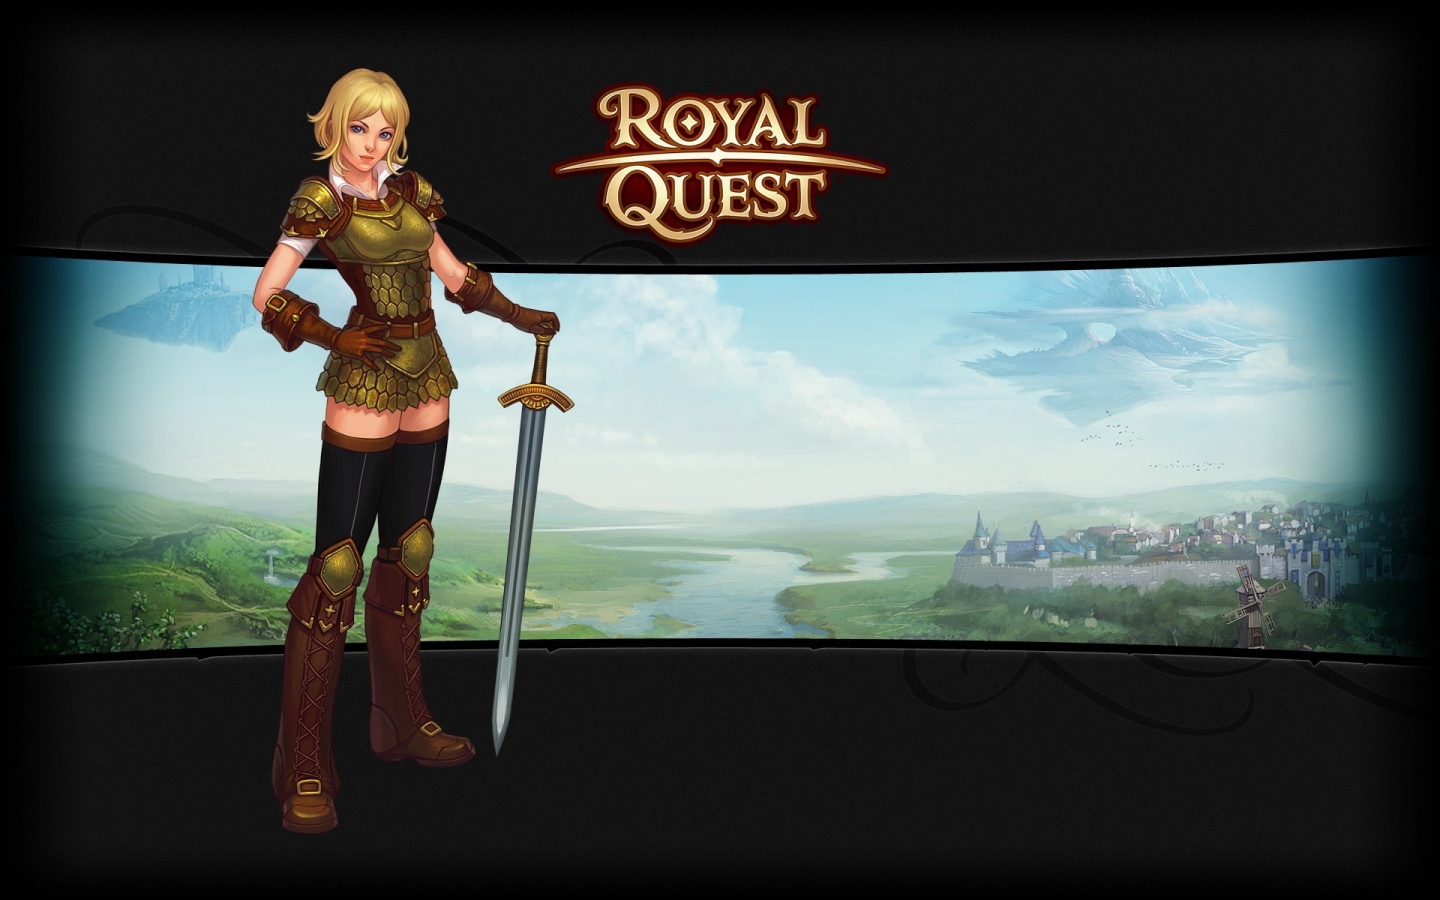 Royal Quest for 1440 x 900 widescreen resolution